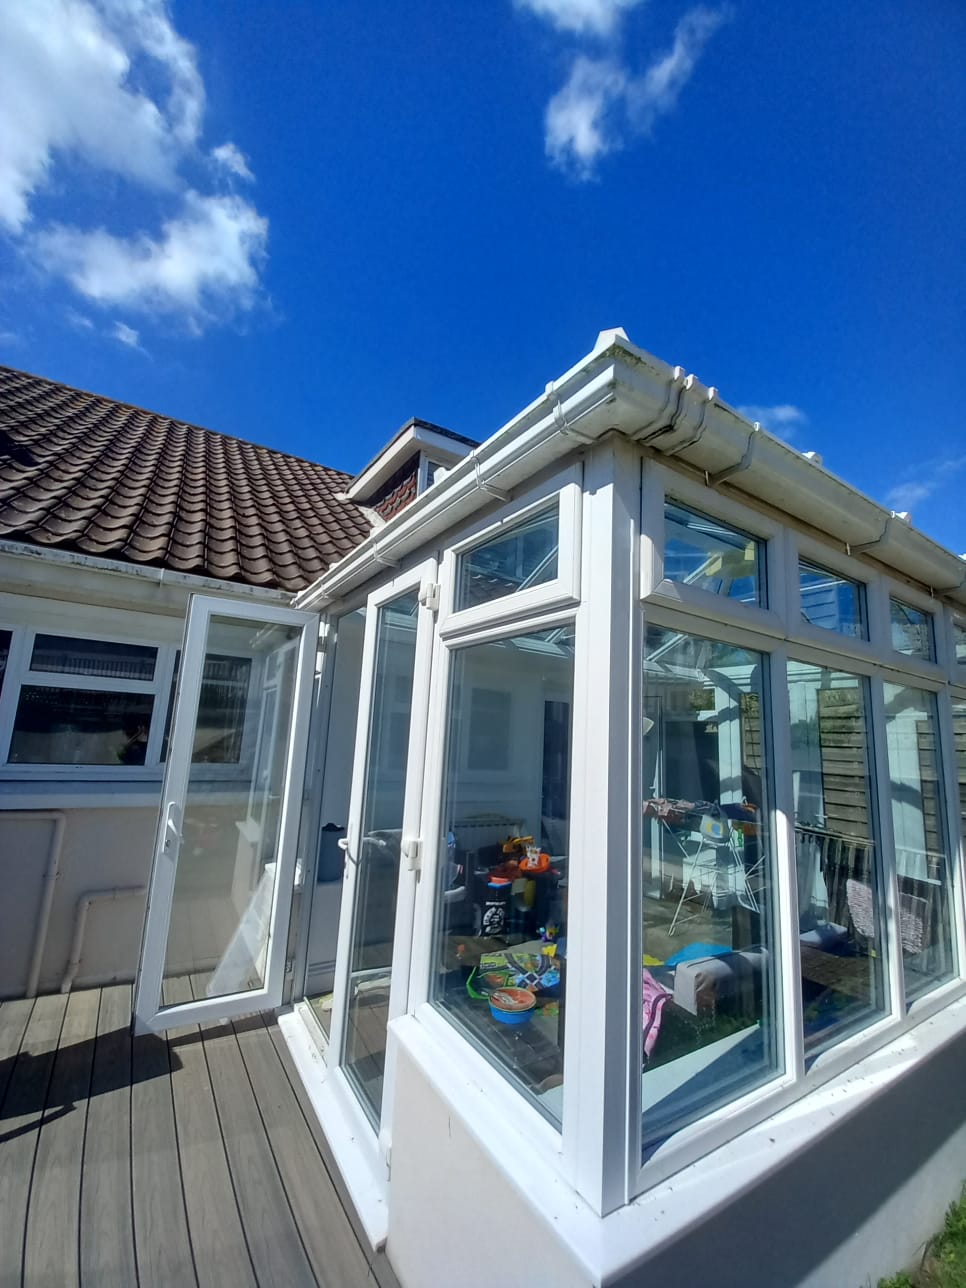 Conservatory on a local house with freshly clean windows and upvc